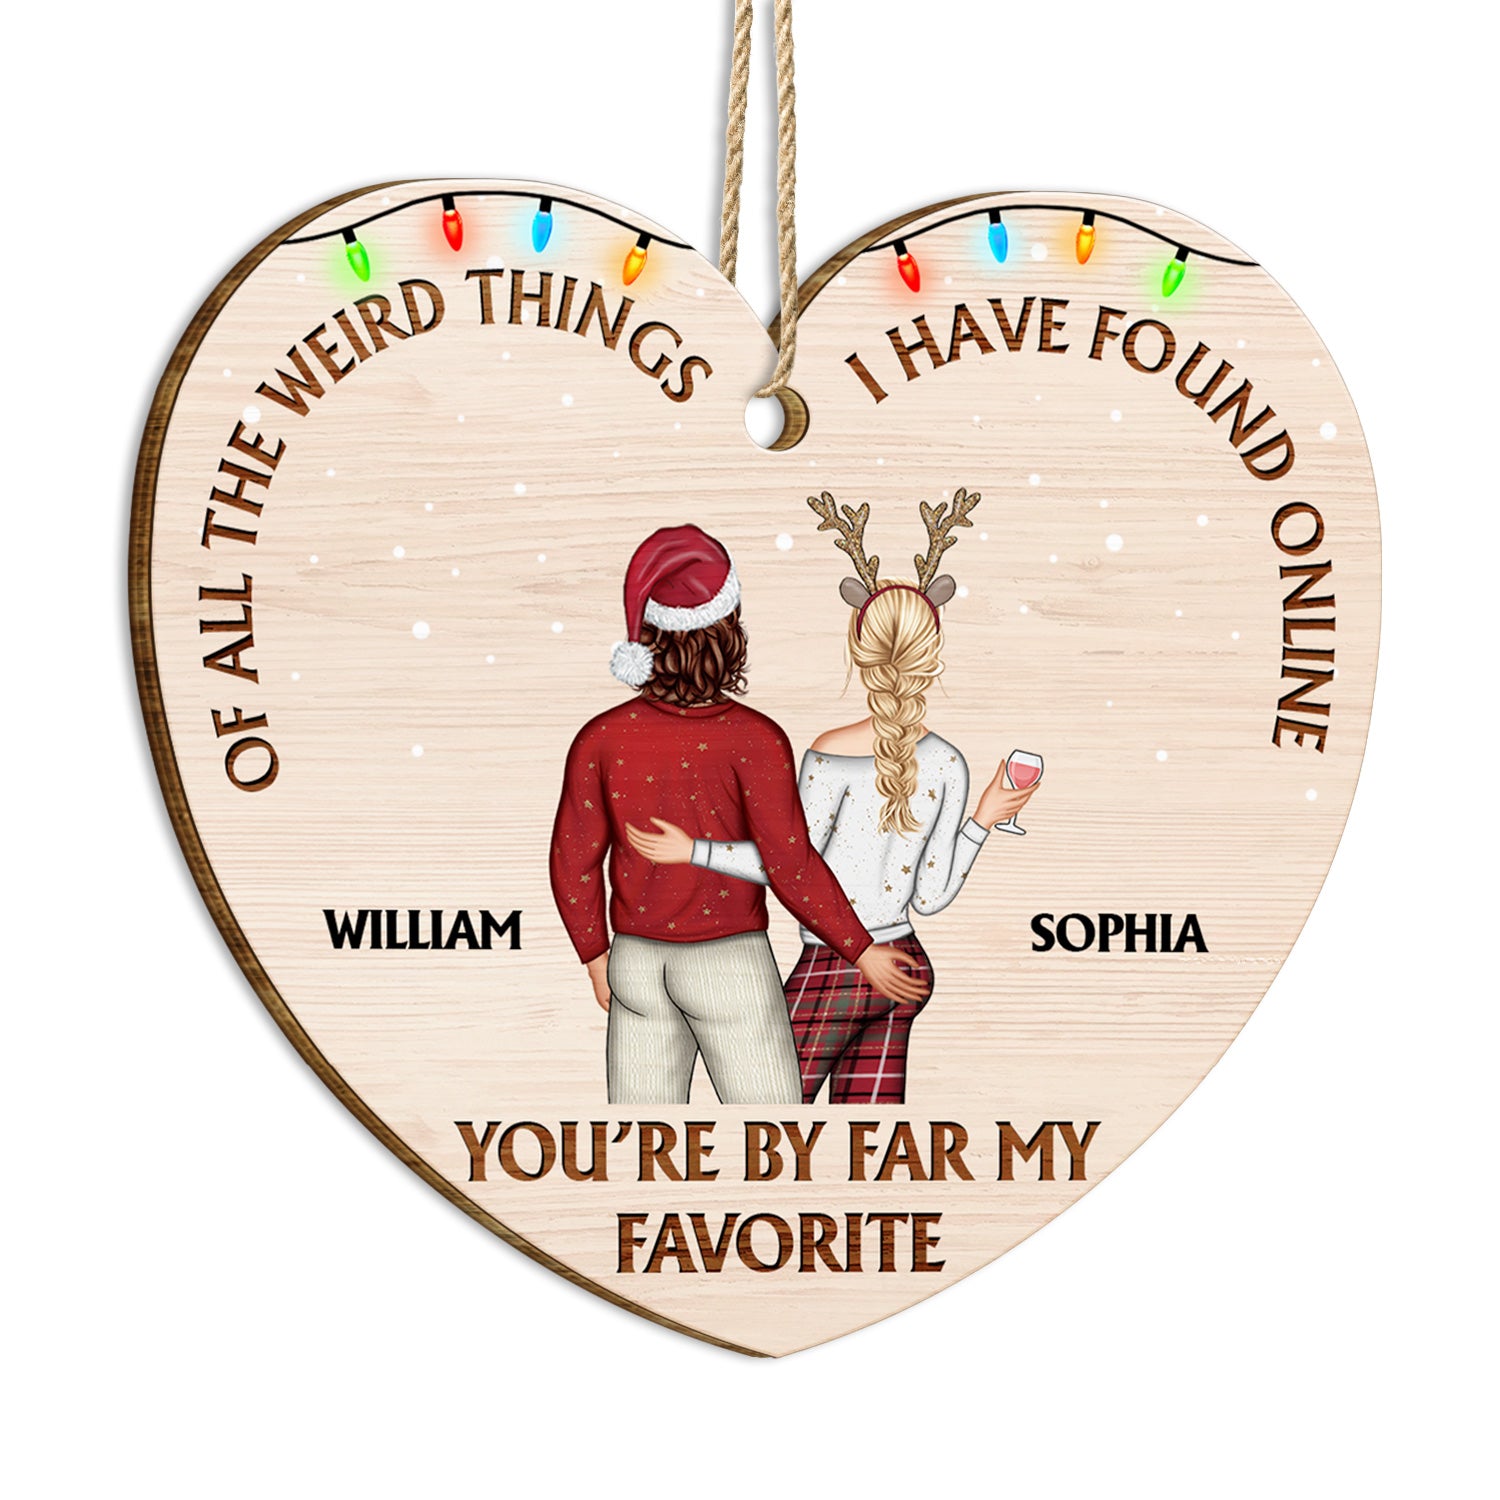 Of All The Weird Things Backside - Christmas Gift For Couples, Husband, Wife - Personalized Custom Shaped Wooden Ornament